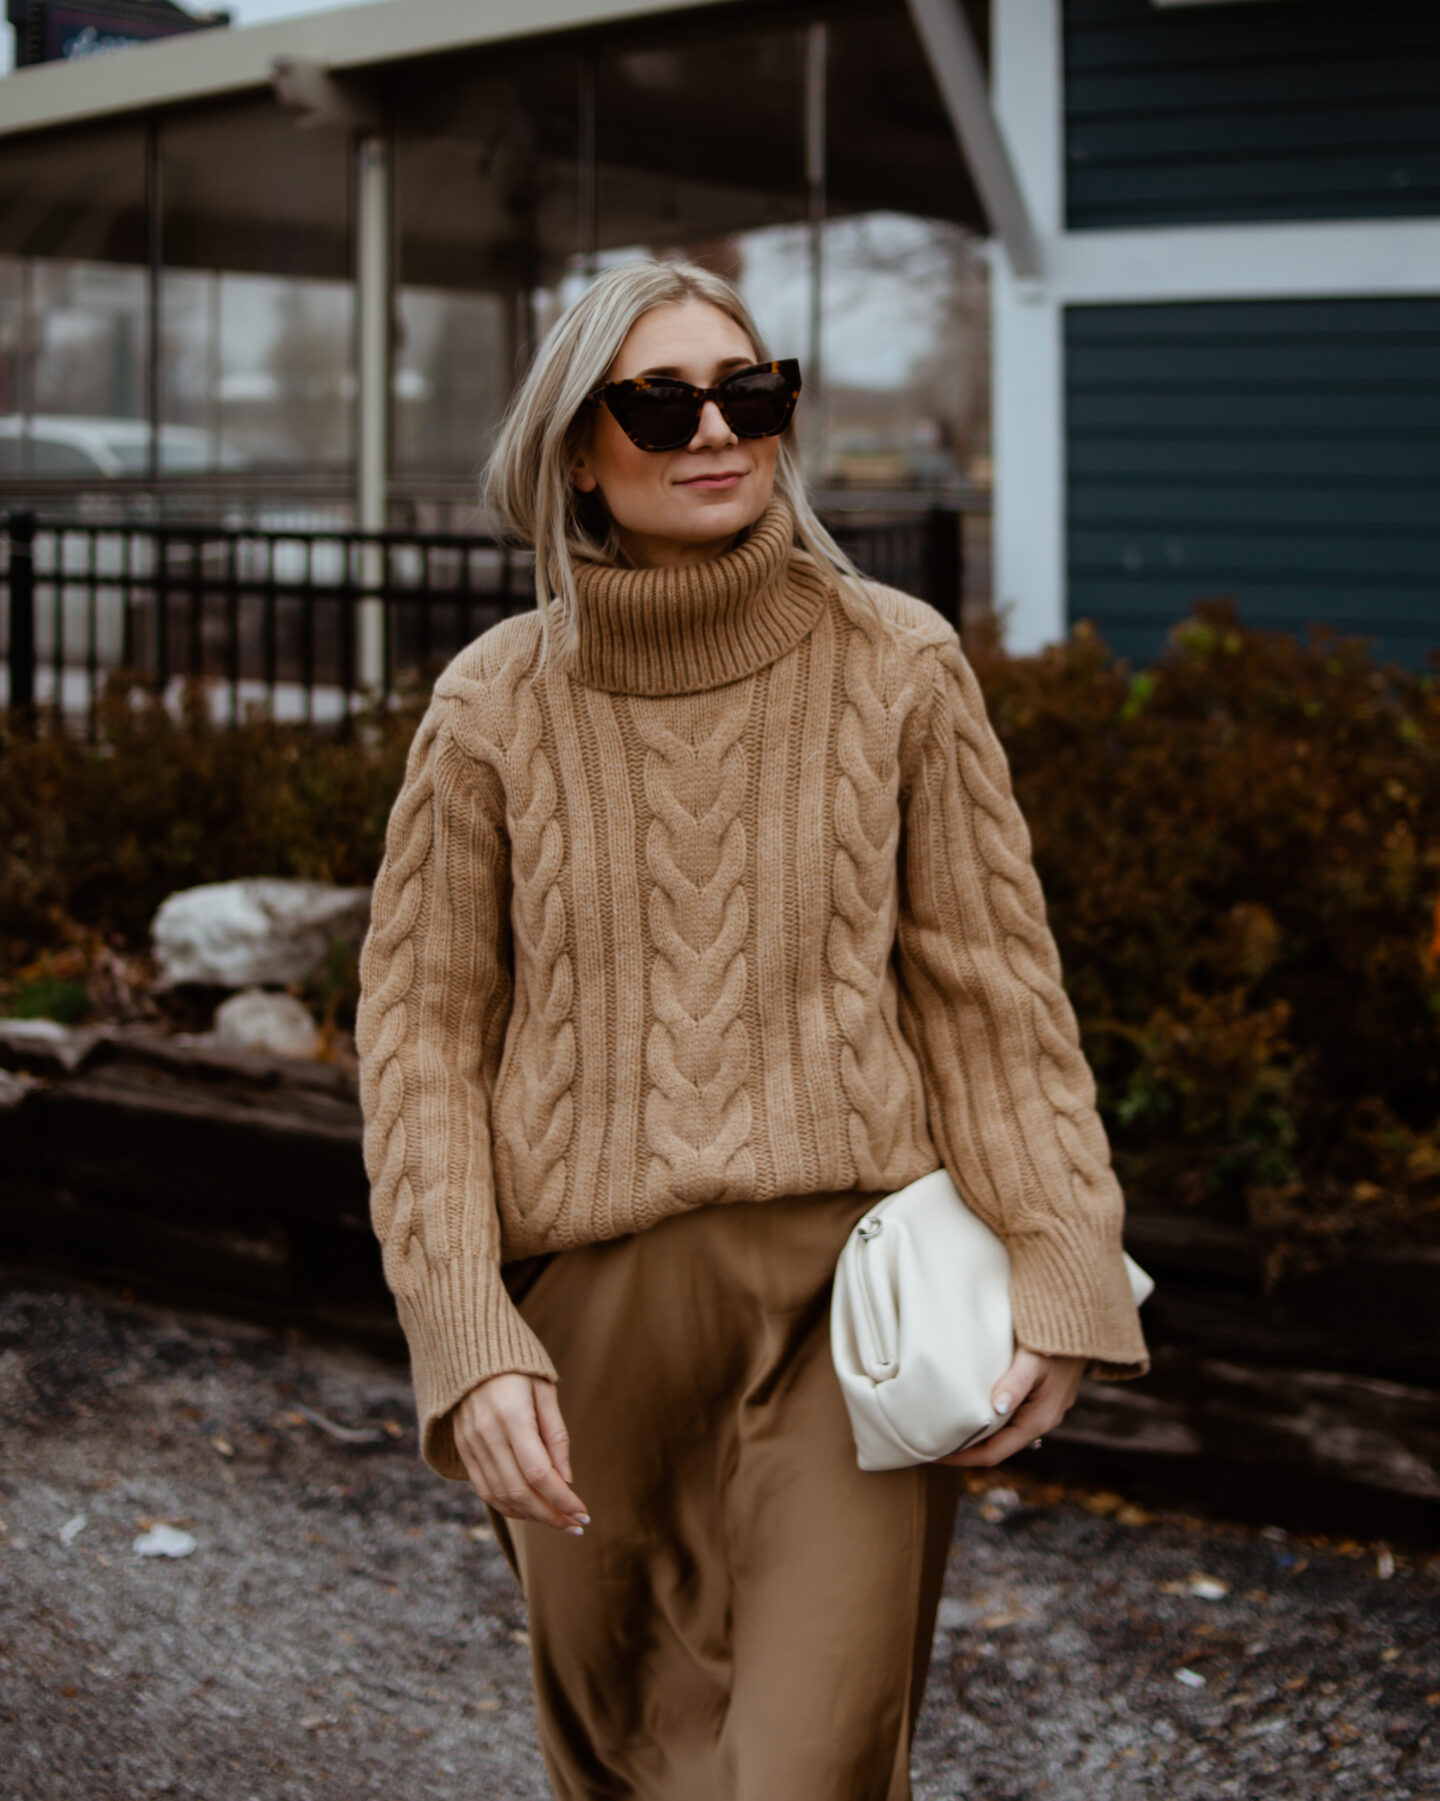 Karin Emily wears a camel cable knit sweater, satin slip skirt, and a cream clutch